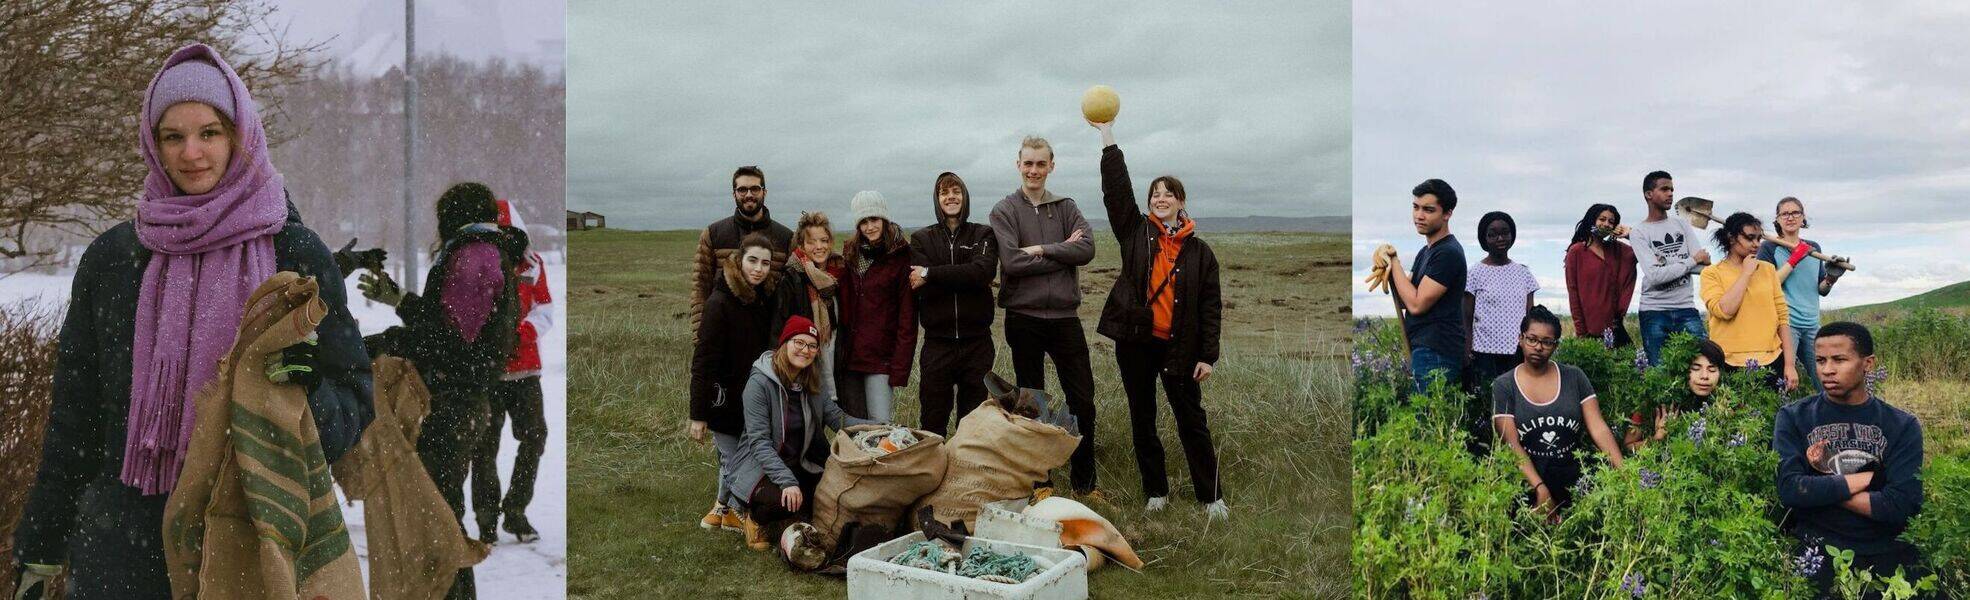 Volunteering Iceland conservation project